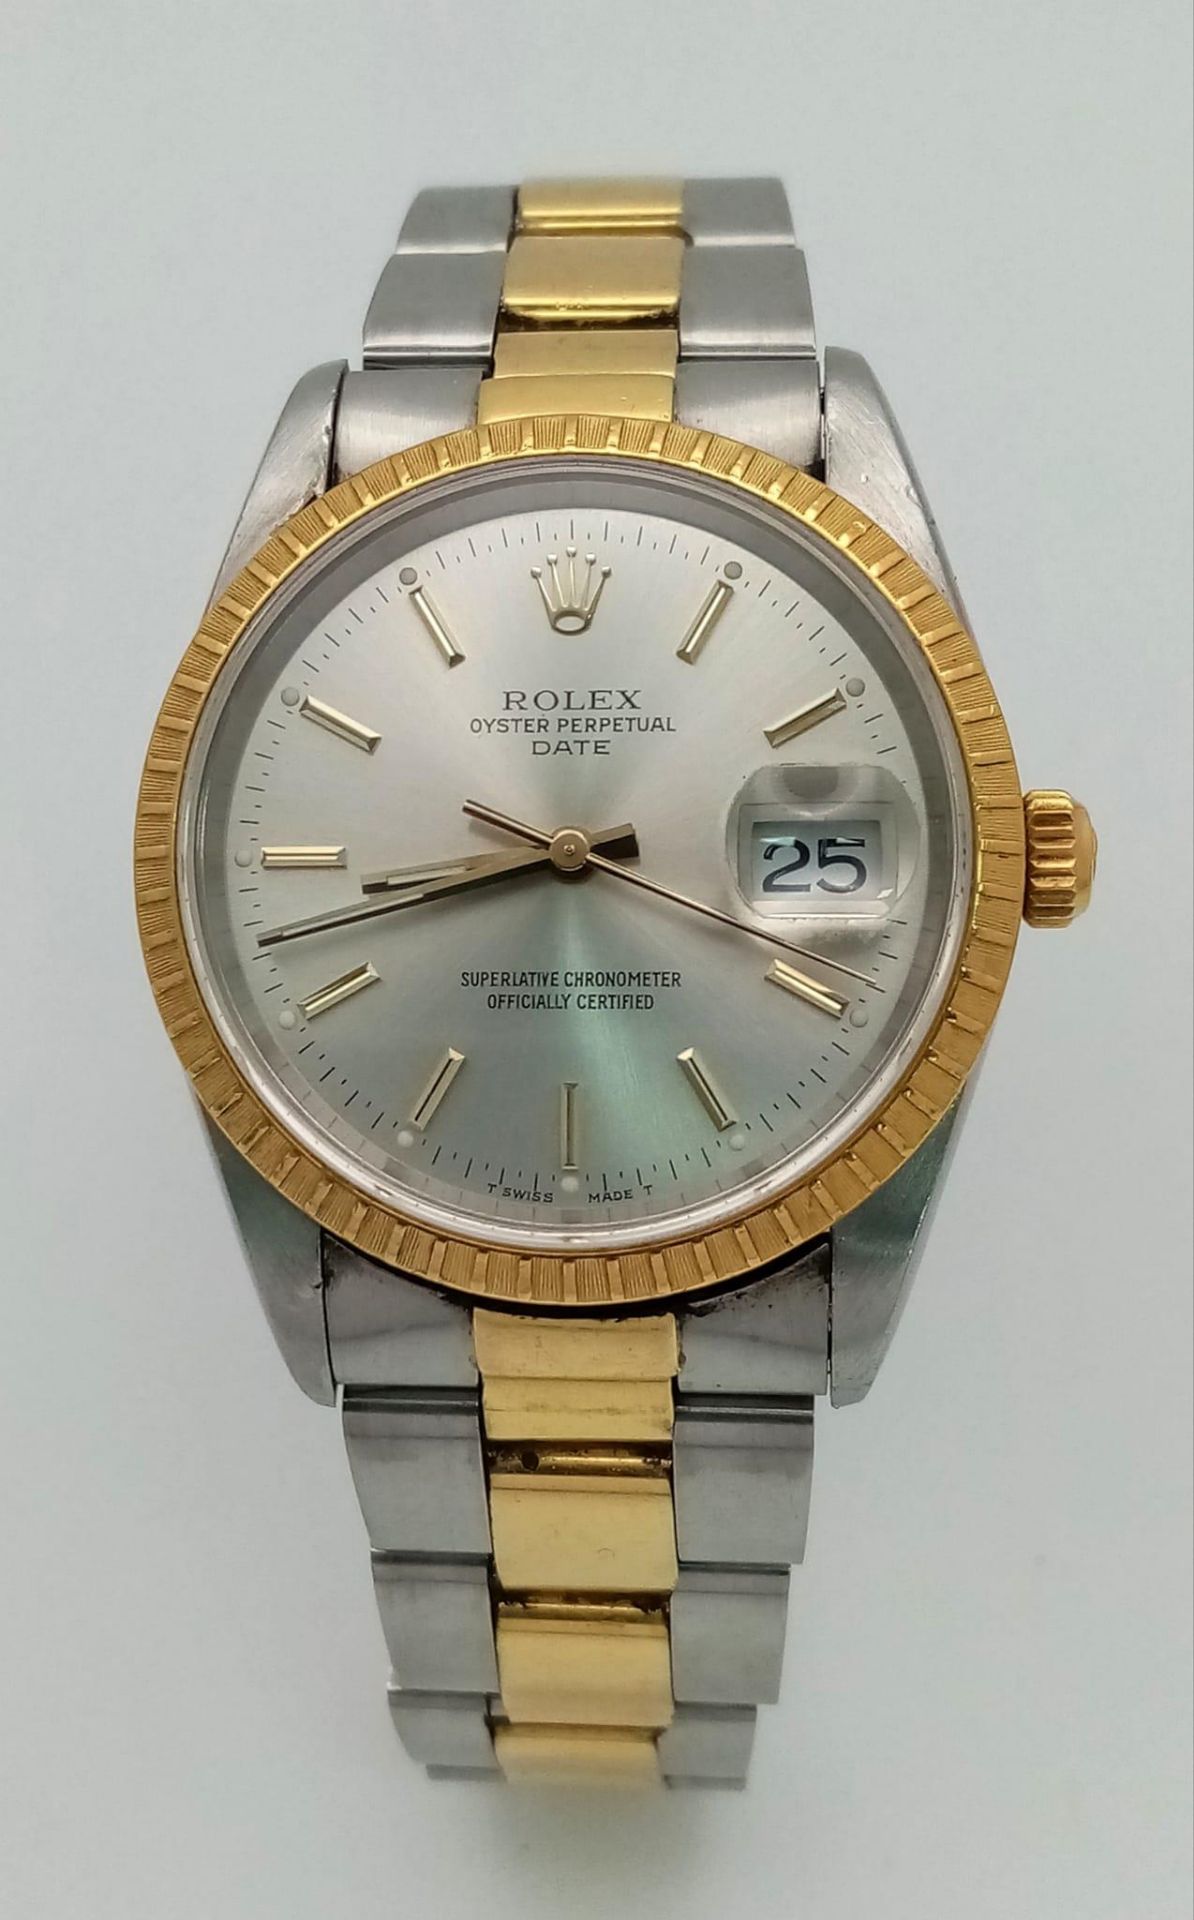 THE CLASSIC ROLEX OYSTER PERPETUAL DATE AUTOMATIC BI-METAL GENTS WATCH WITH TASTEFUL SILVERTONE DIAL